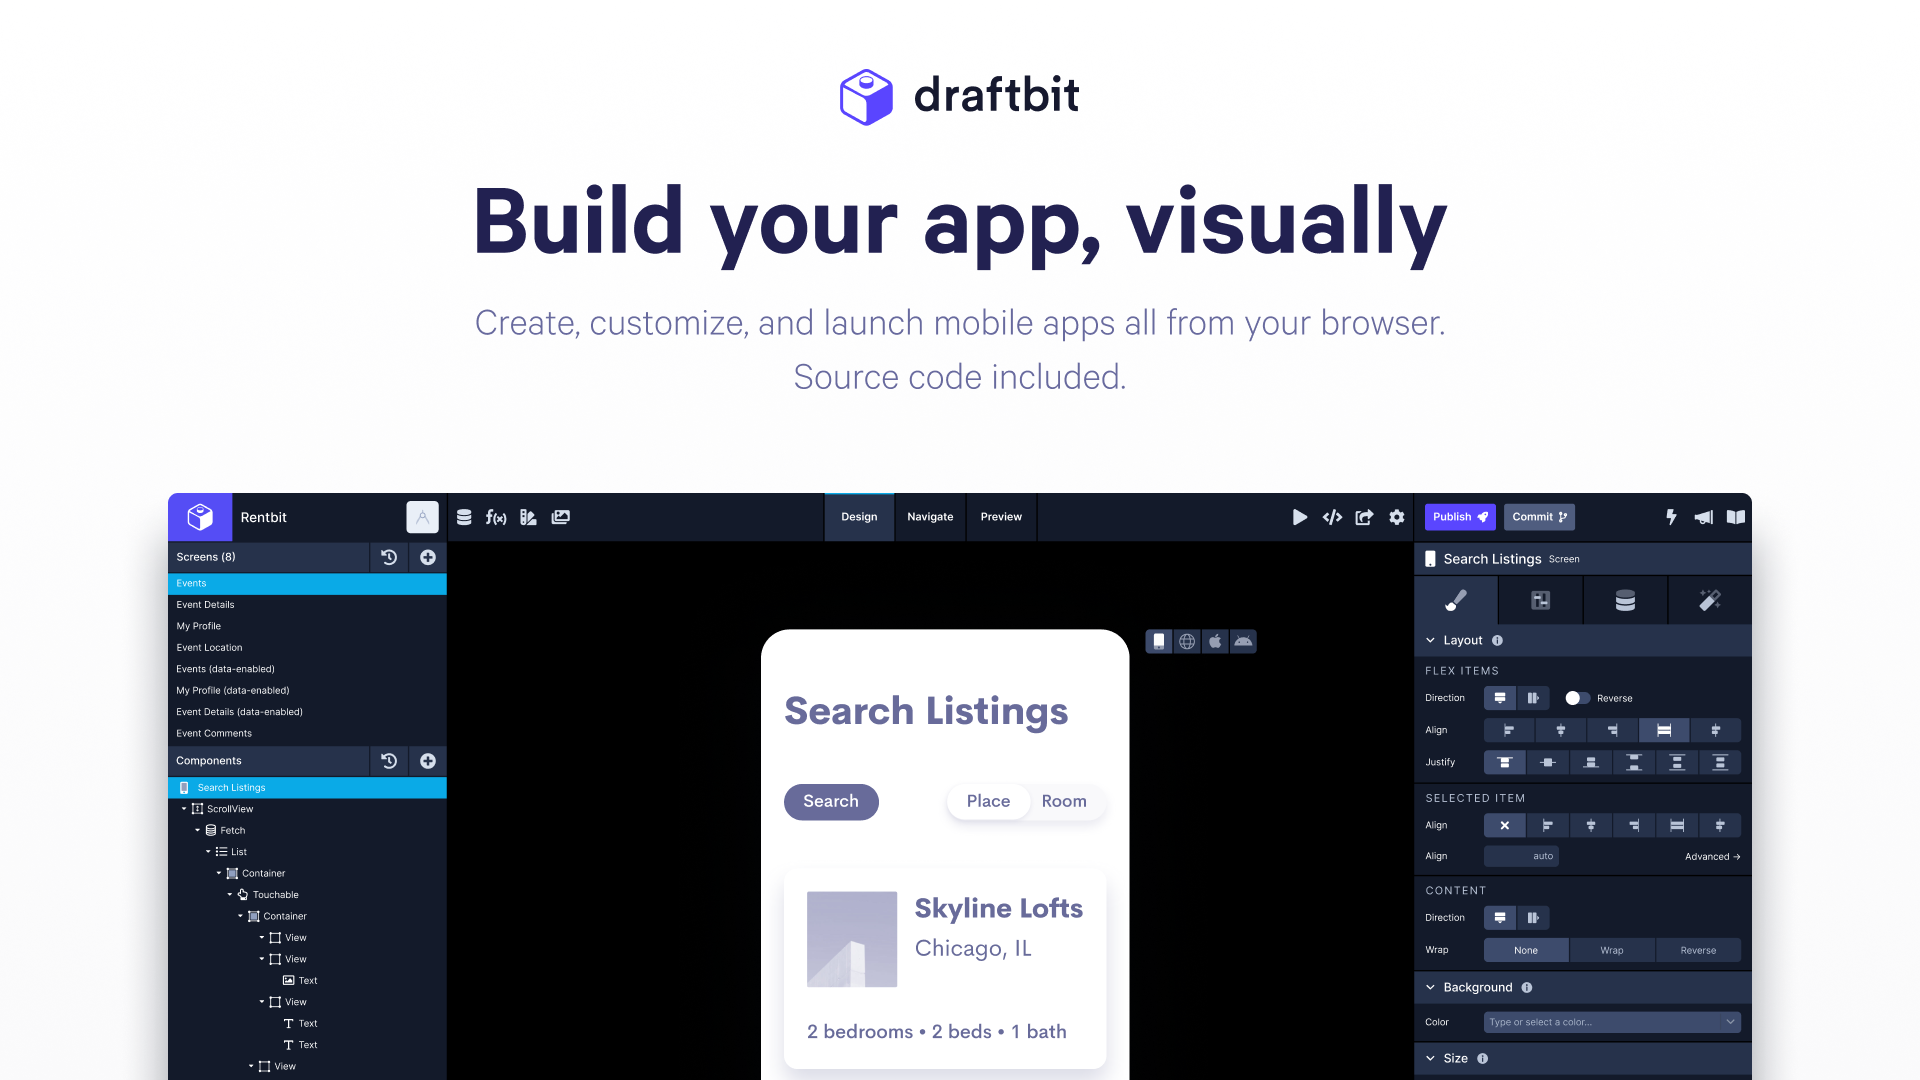 Build your app visually. Create, customize, and launch mobile apps from your browser. Source code included.